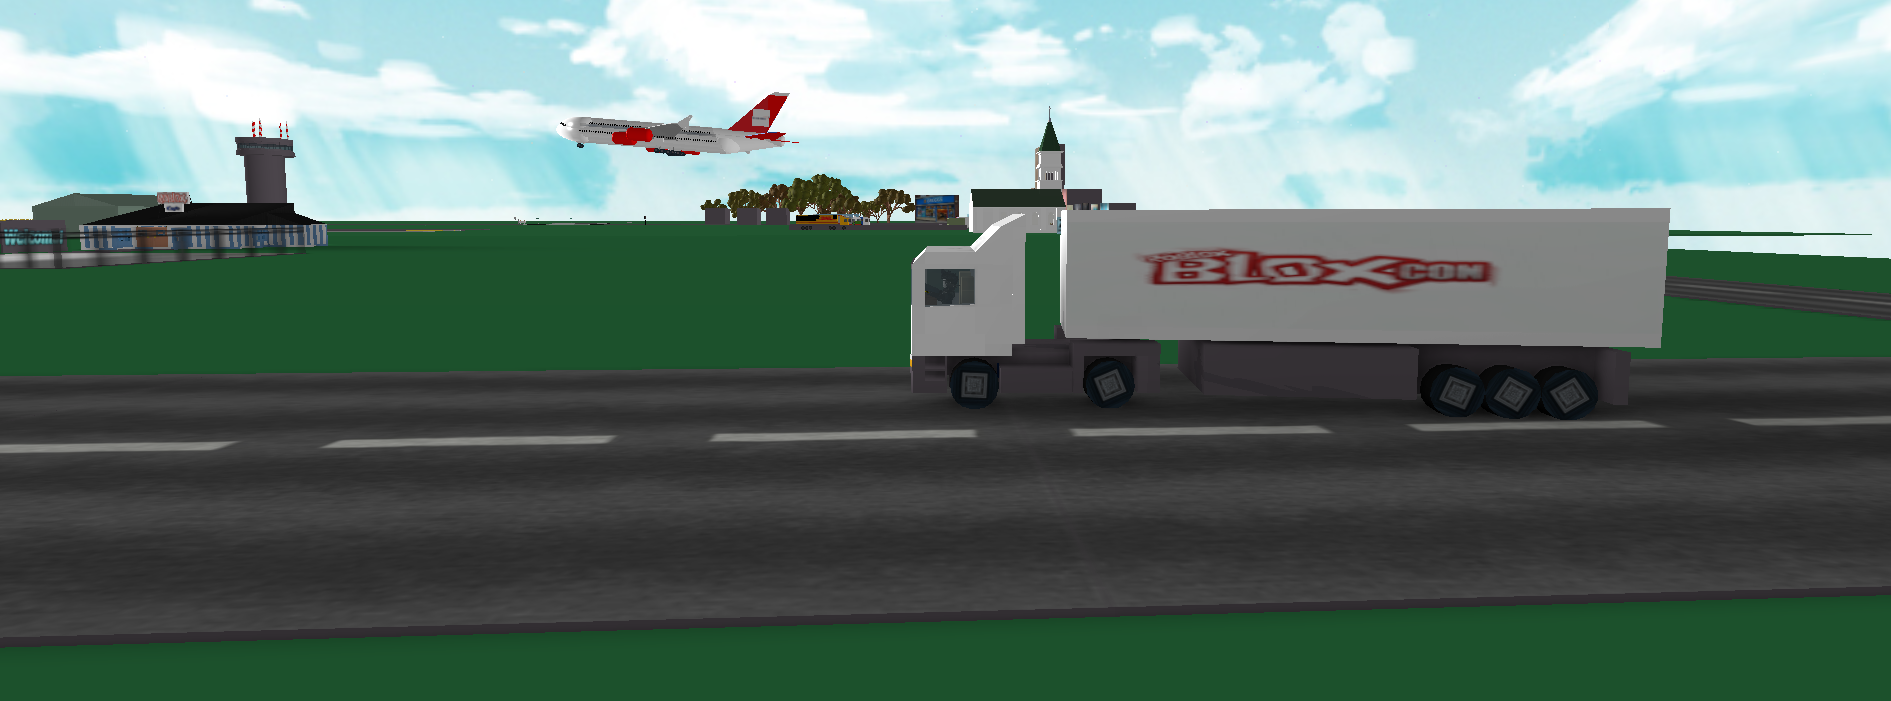 Barreling down the interstate in a BLOXcon themed semi. 